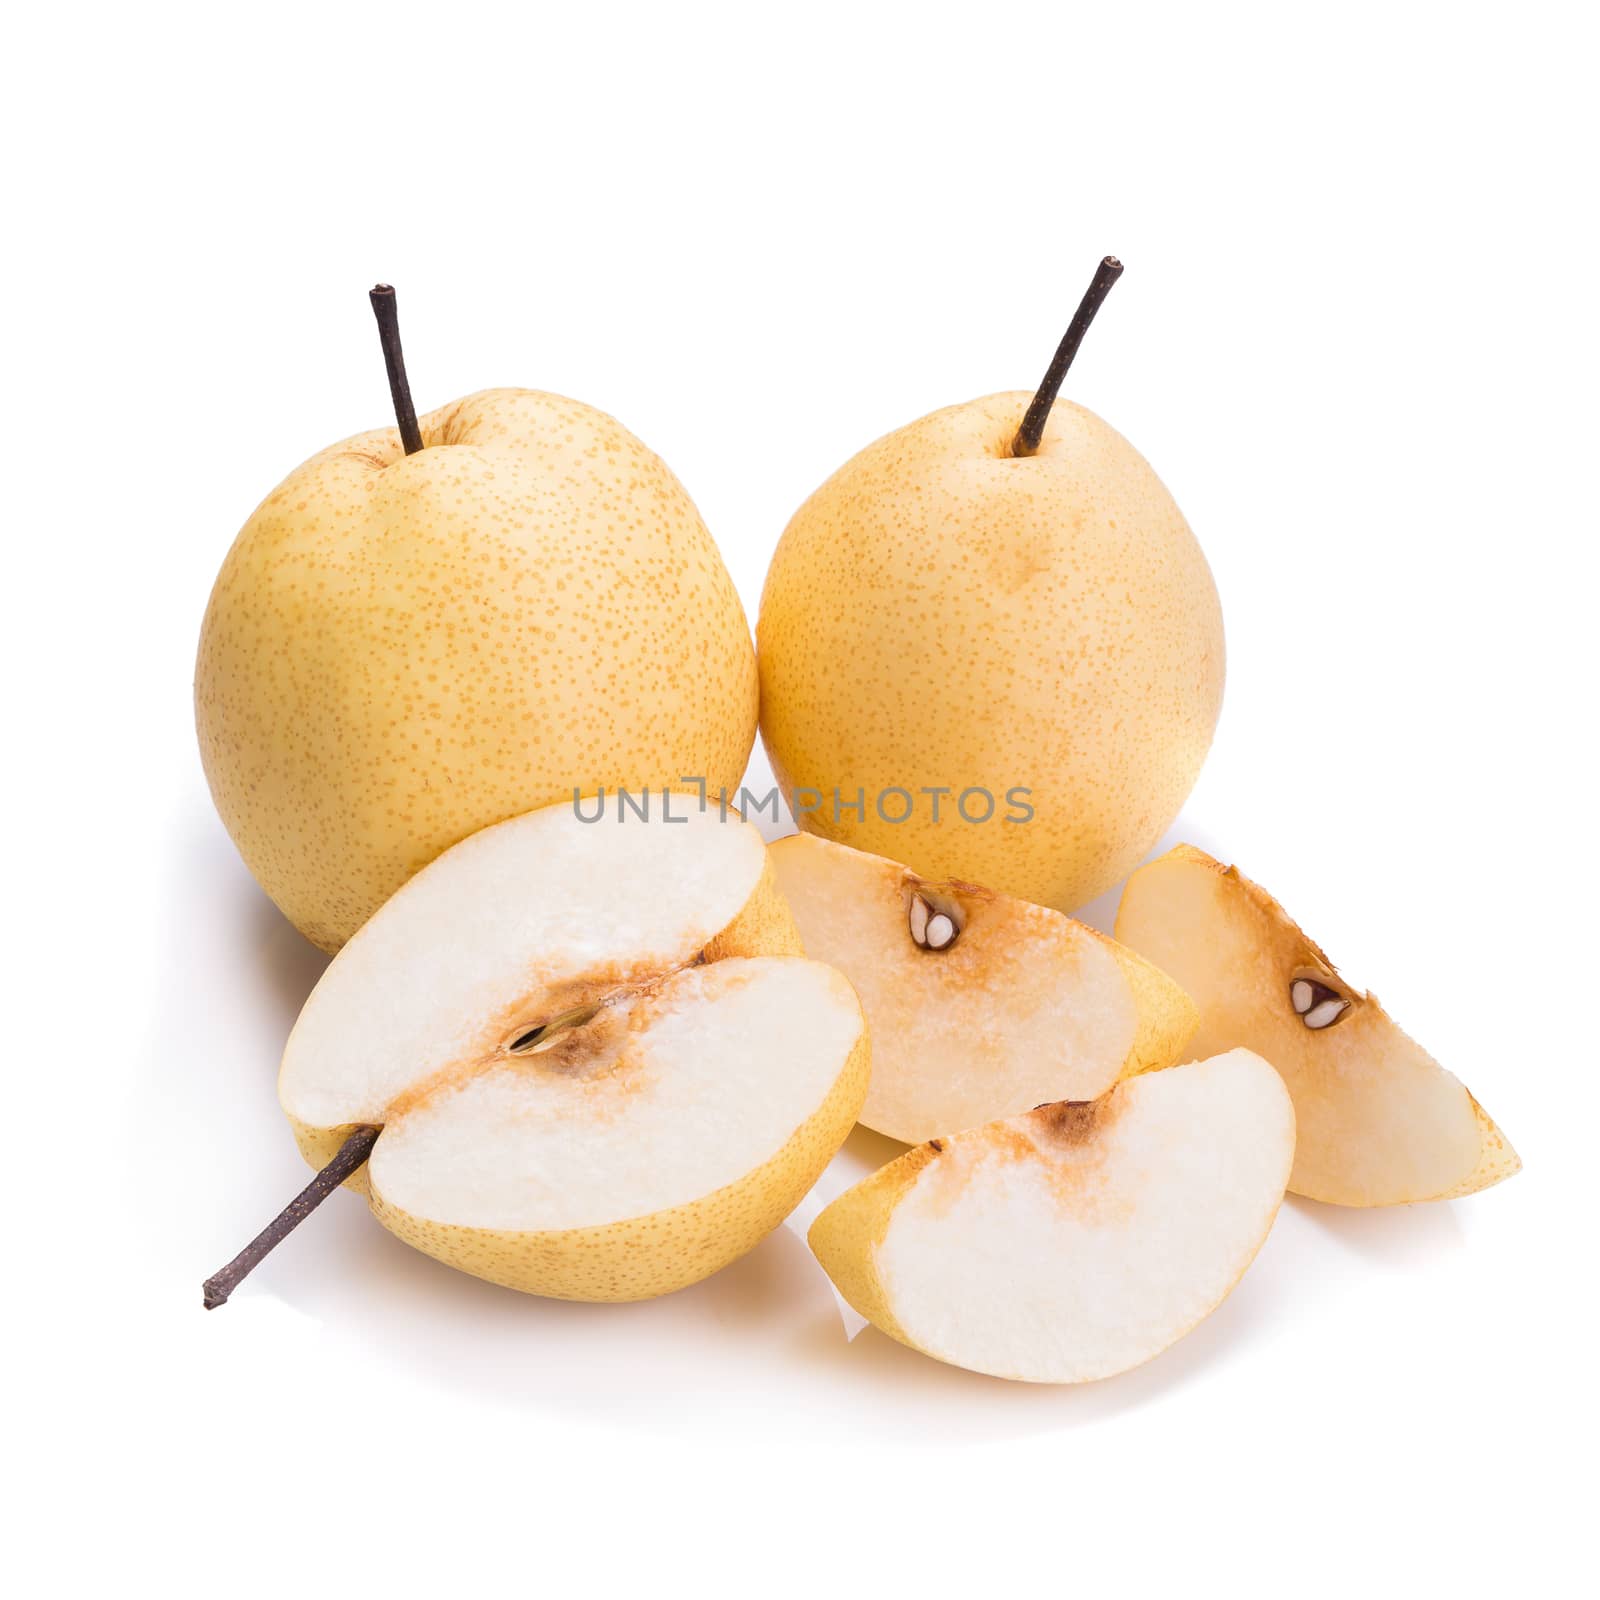 Chinese pear fruits on white background.